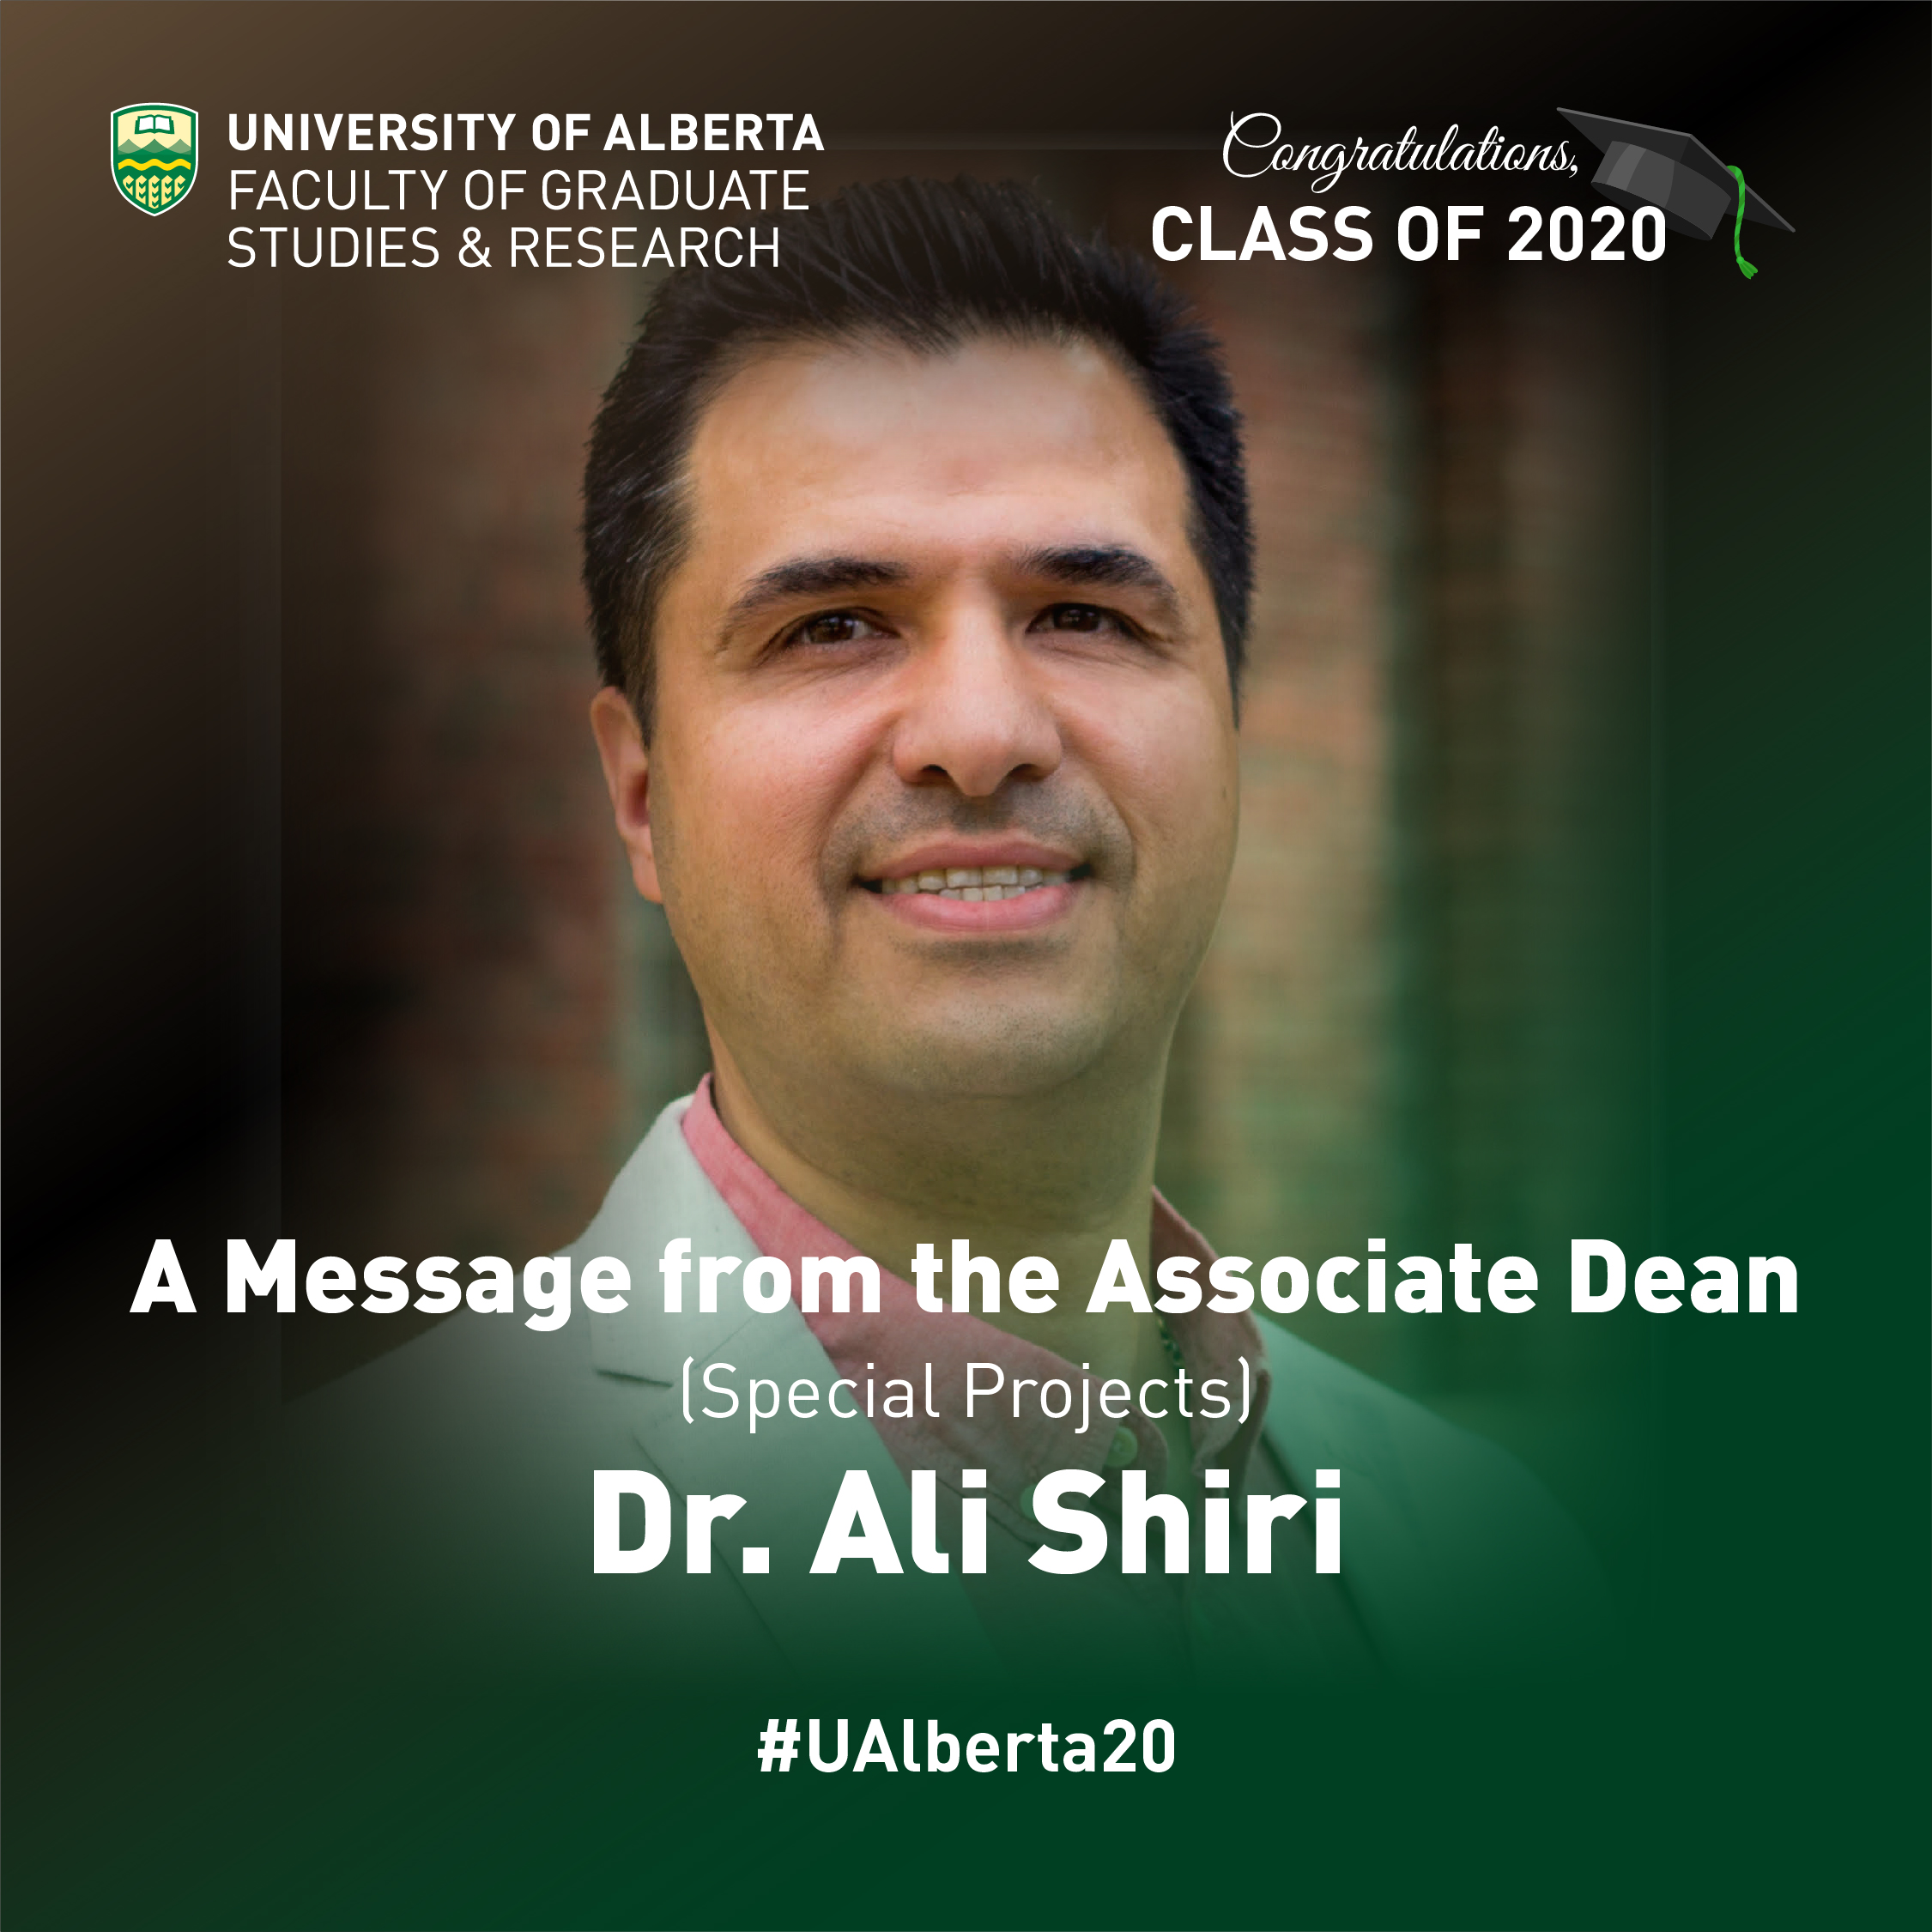 A Message from Dr. Ali Shiri, FGSR Associate Dean (Special Projects)